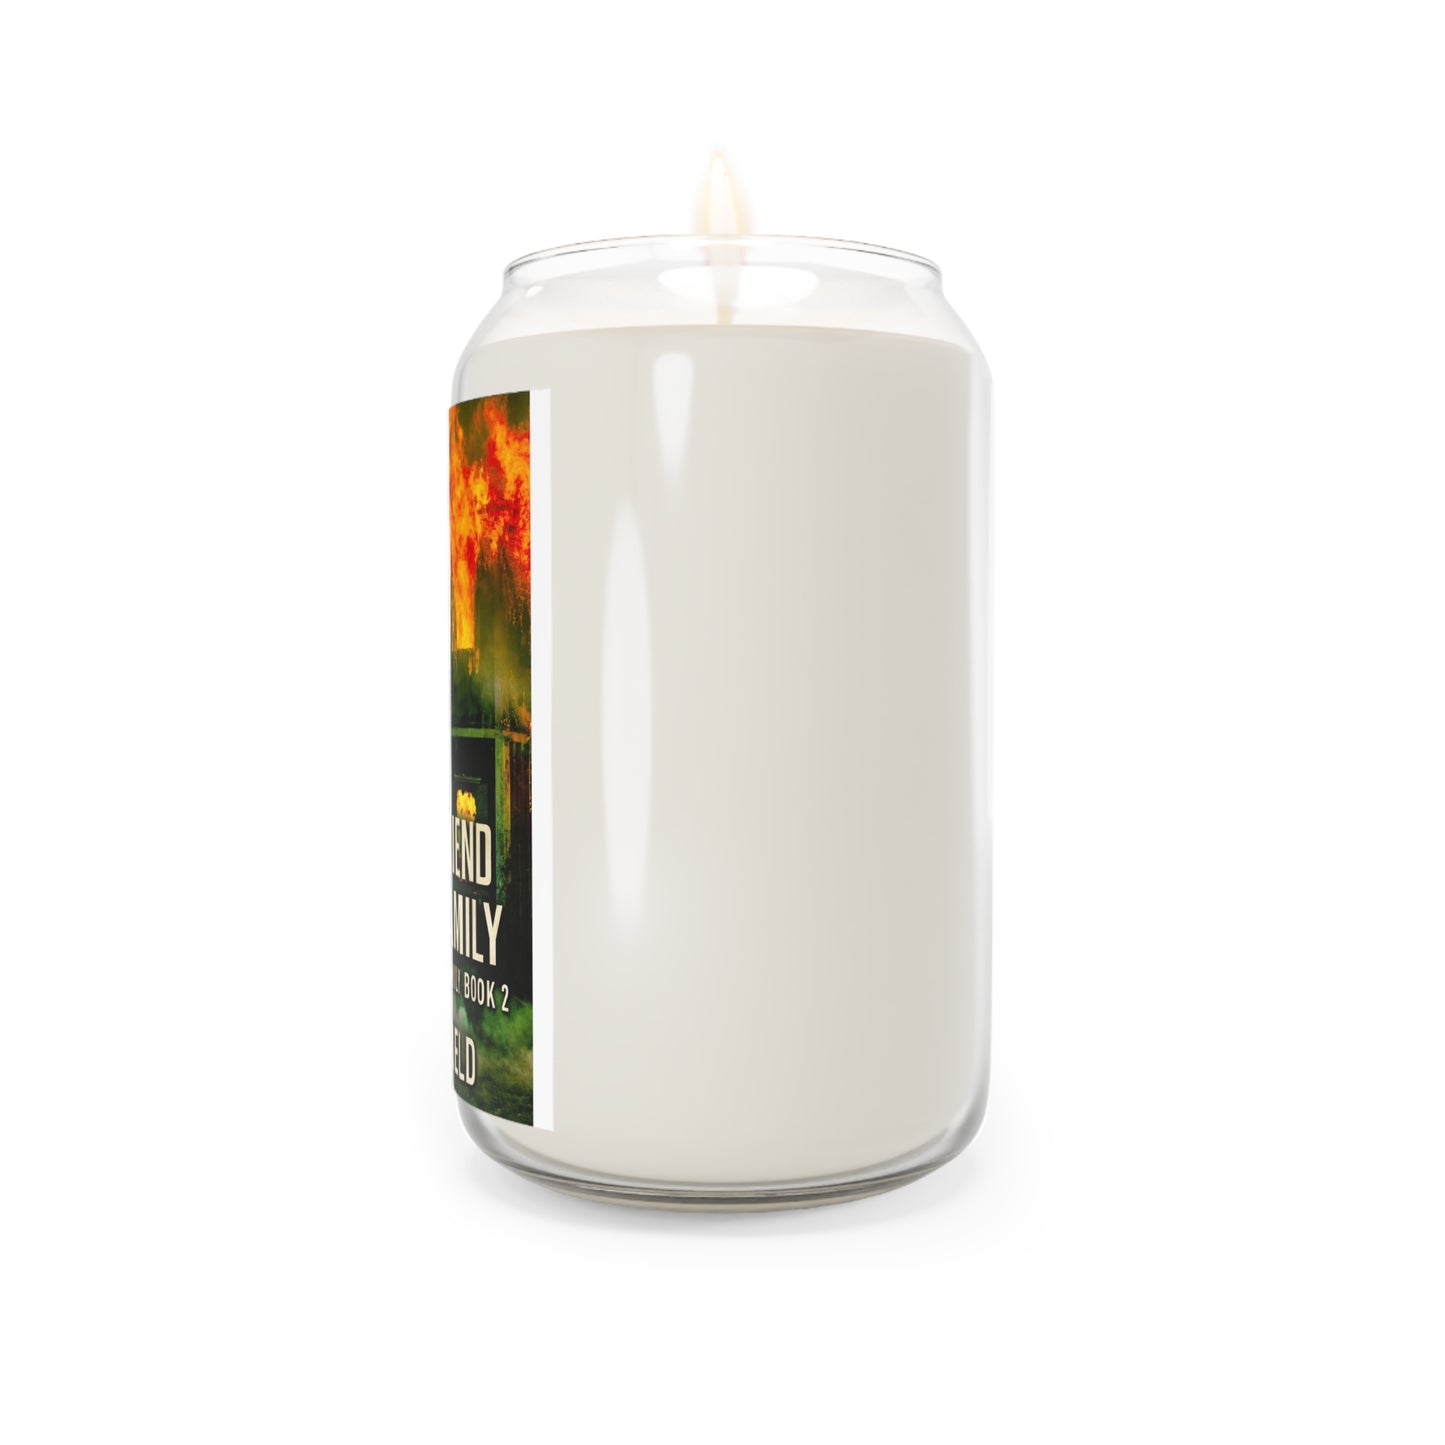 Not A Friend Of The Family - Scented Candle